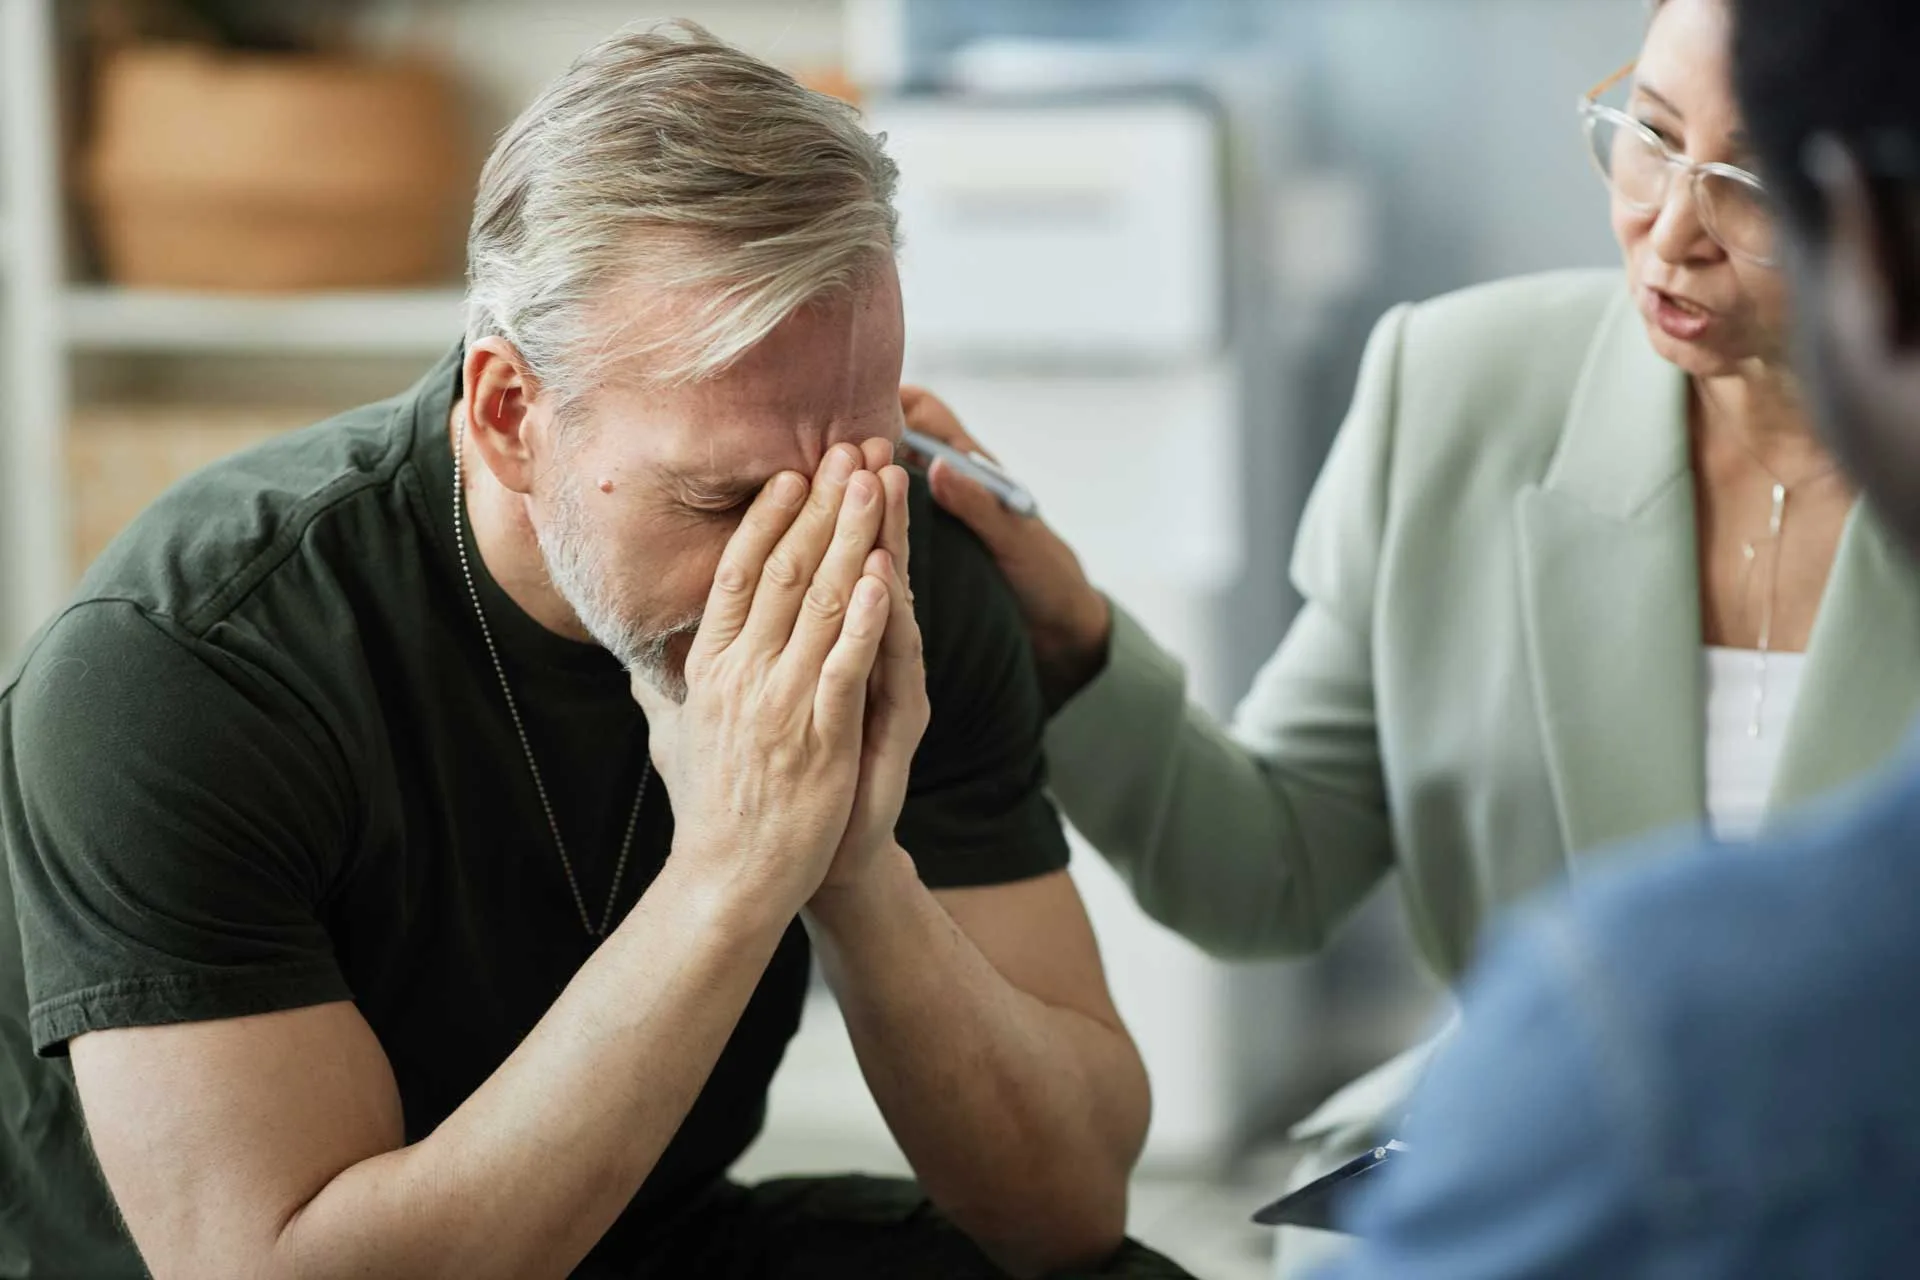 Man covers his face during a grief counseling session.